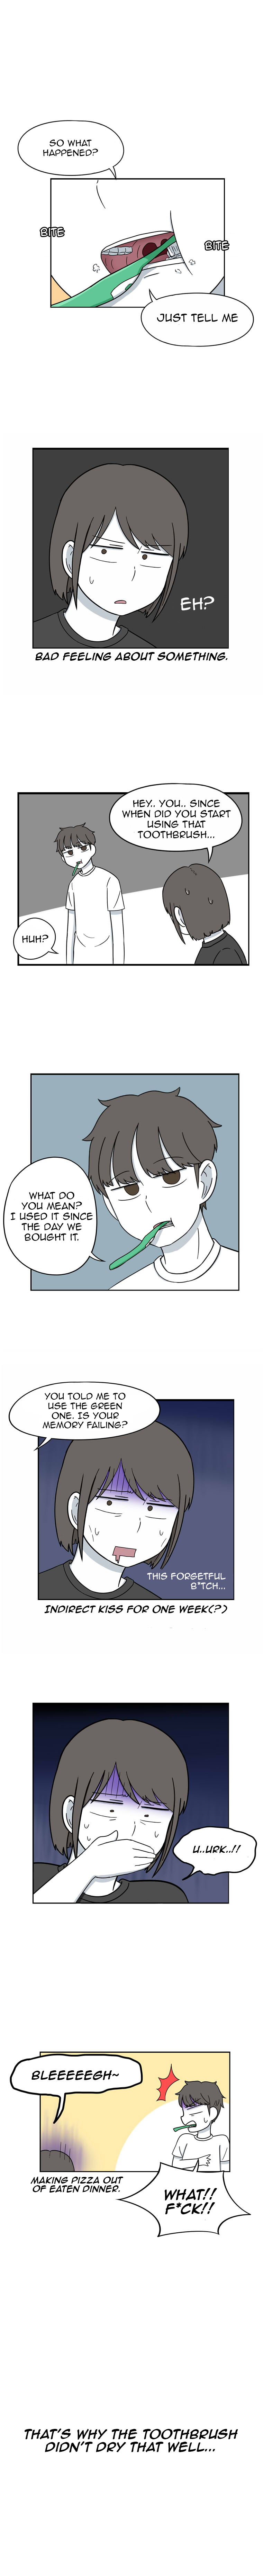 The Daily Lives of Us Siblings Vol. 1 Ch. 27 Toothbrush